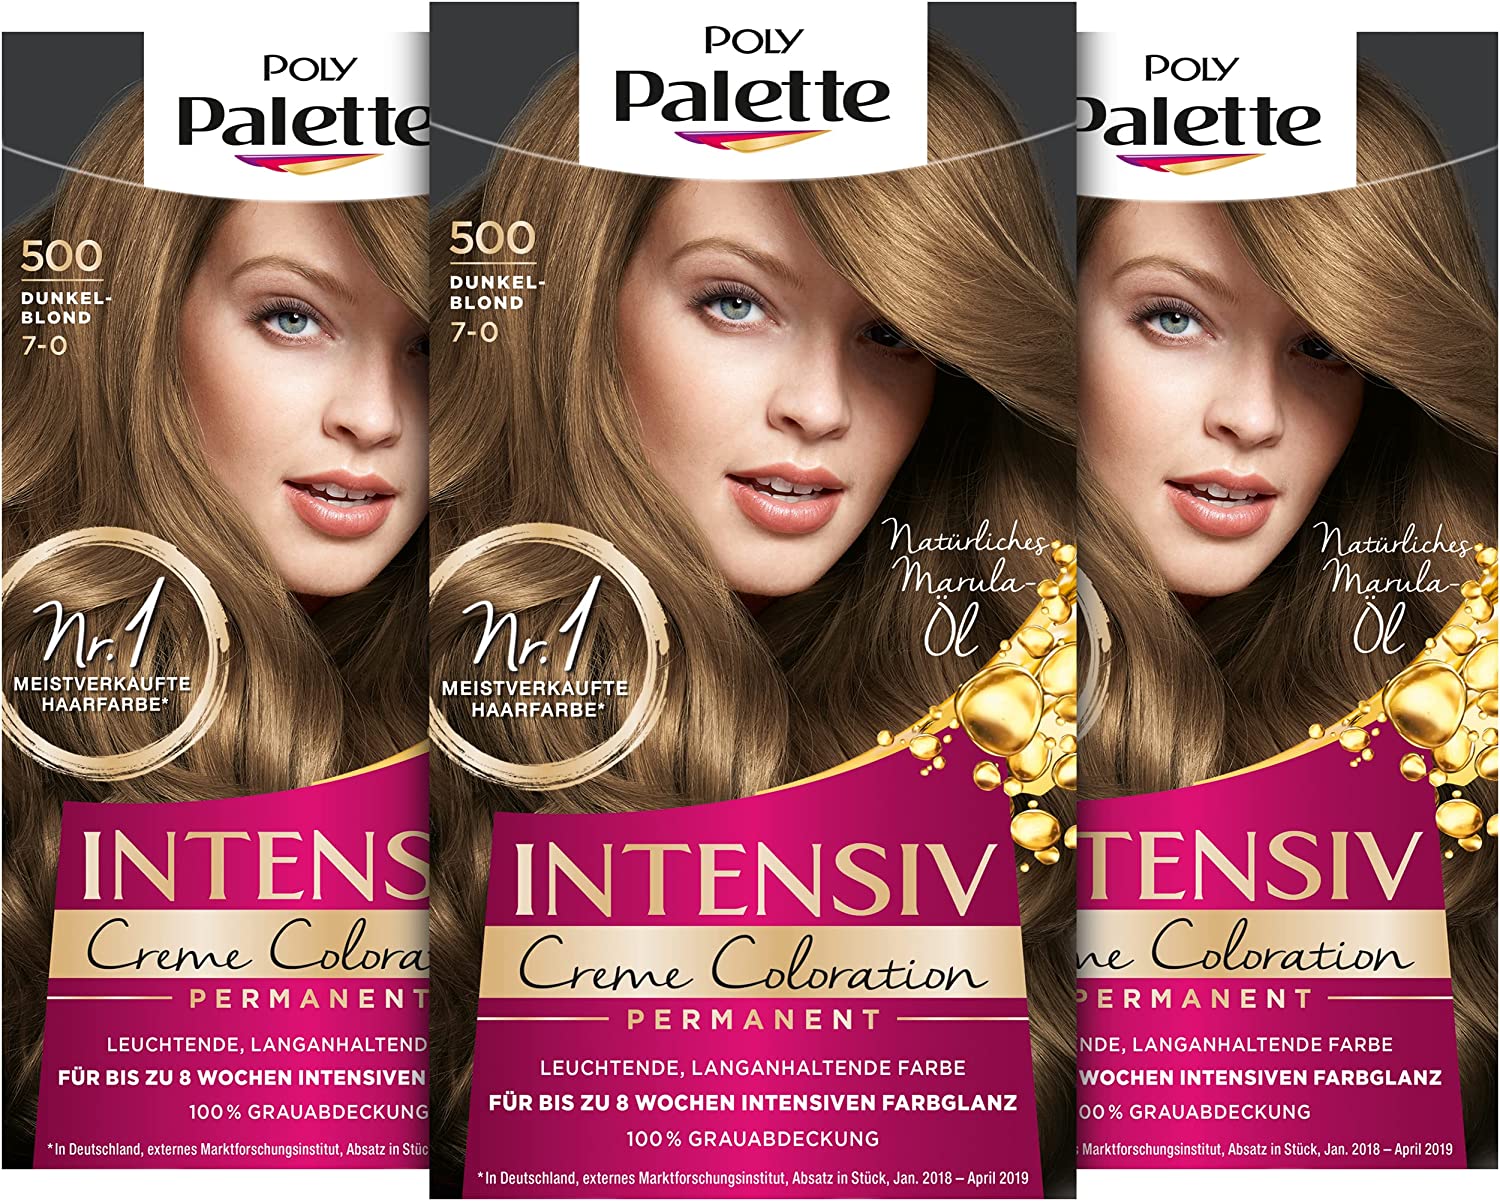 Poly Palette Intensive Cream Colouration 7-0/500 Dark Blonde Level 3 (3 x 115 ml), Permanent Colouration for up to 8 Weeks of Intense Colour Shine & 100% Grey Coverage